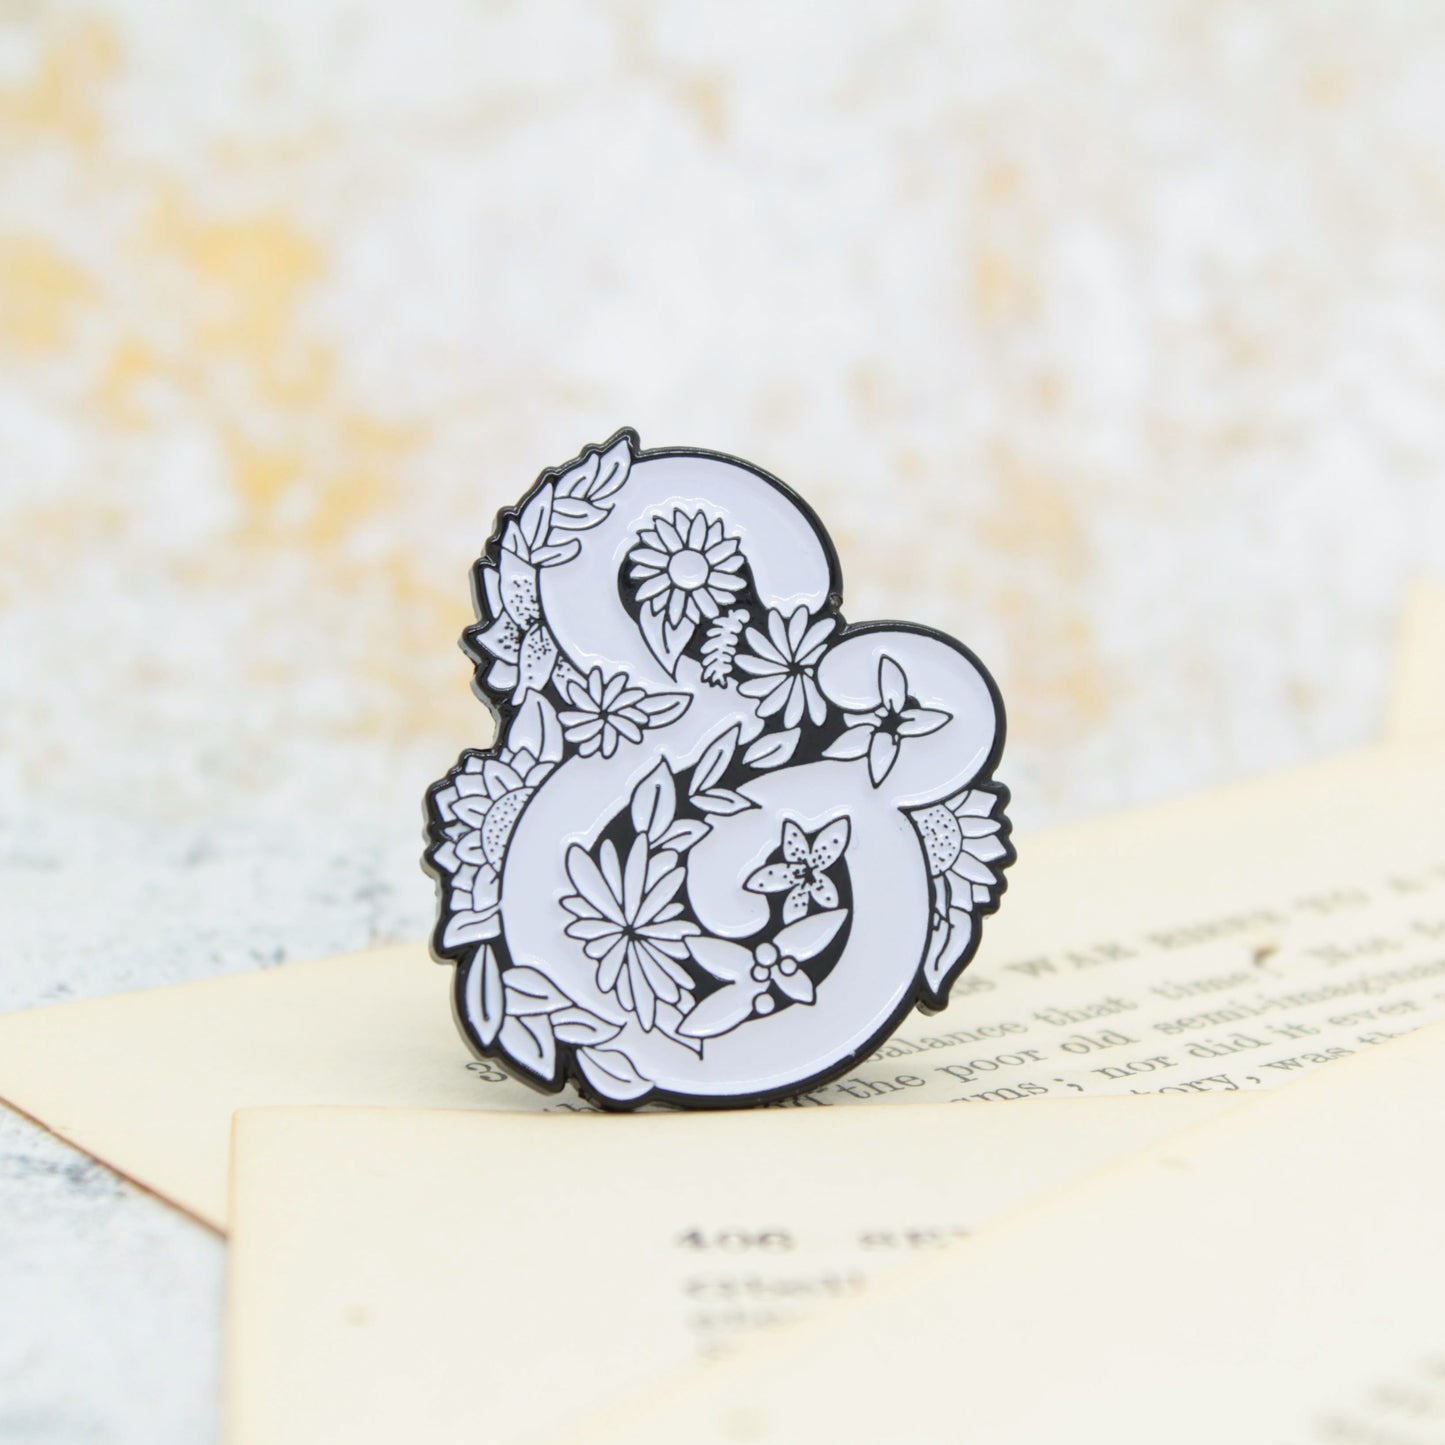 Black and white ampersand and symbol surrounded by flowers enamel pin